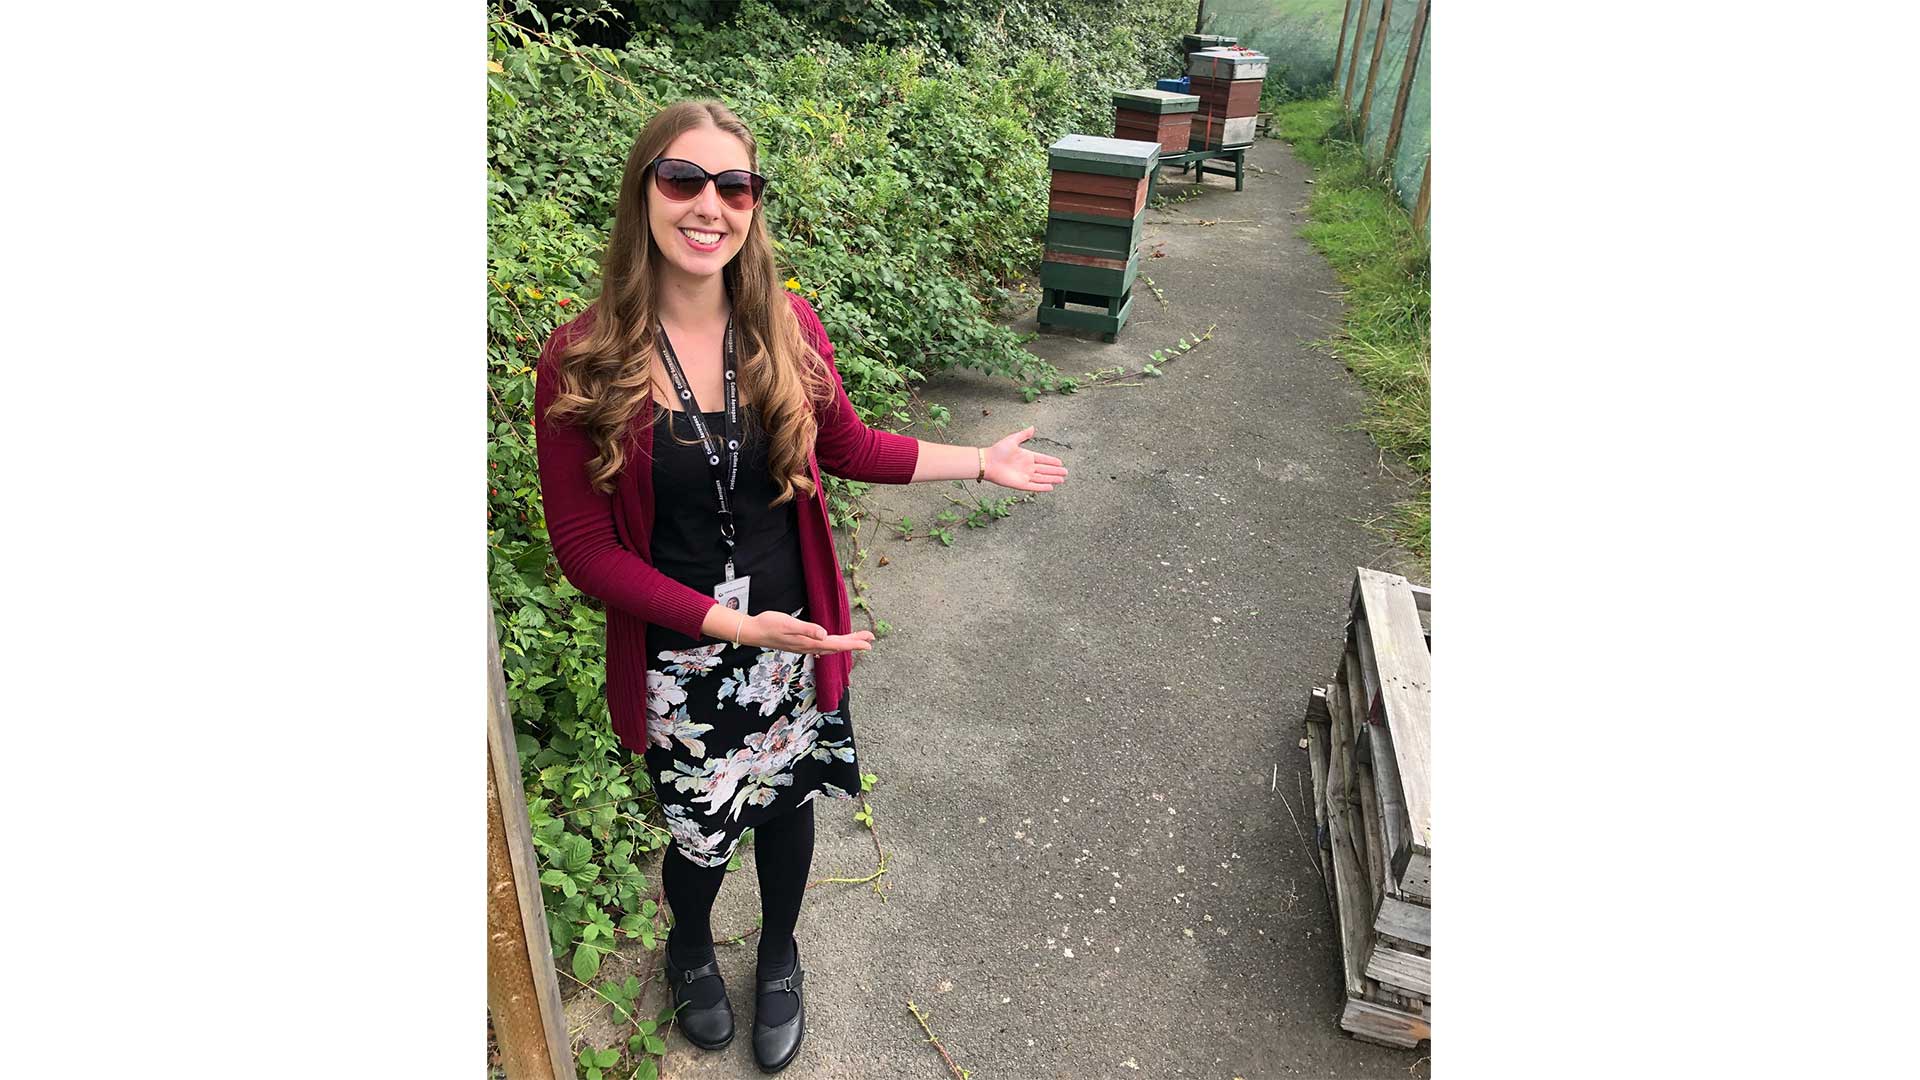 Fay Heywood, an advisor for the Collins Aerospace Environment, Health & Safety team in Wolverhampton, stands in front of the beehives she helped bring to the site.